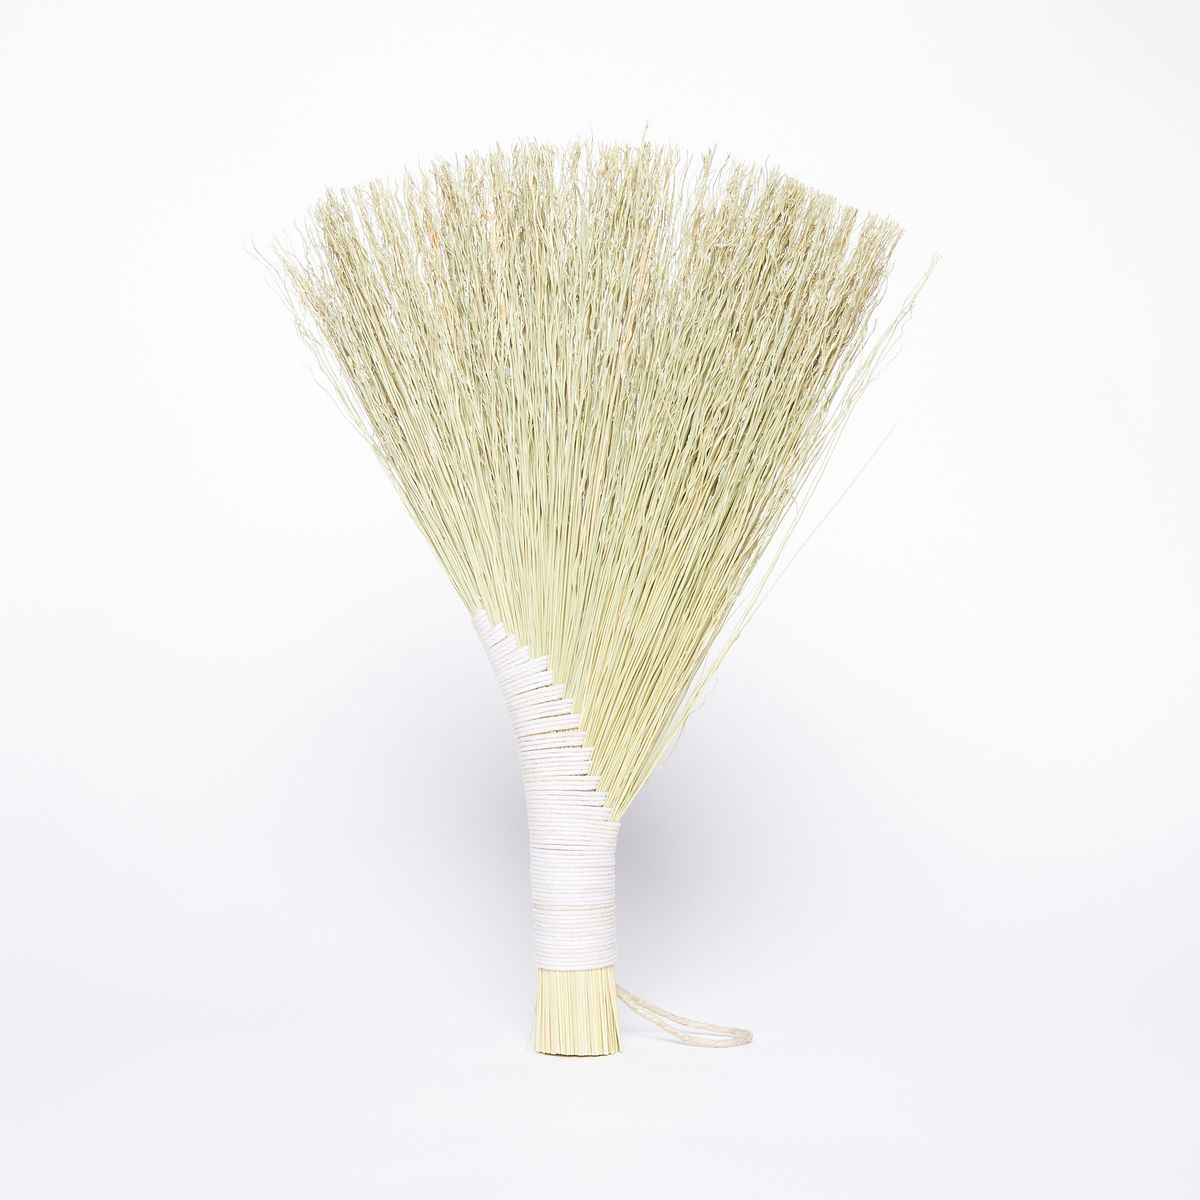 A hand broom made of sorghum that is tied at the handle and fans out at the head